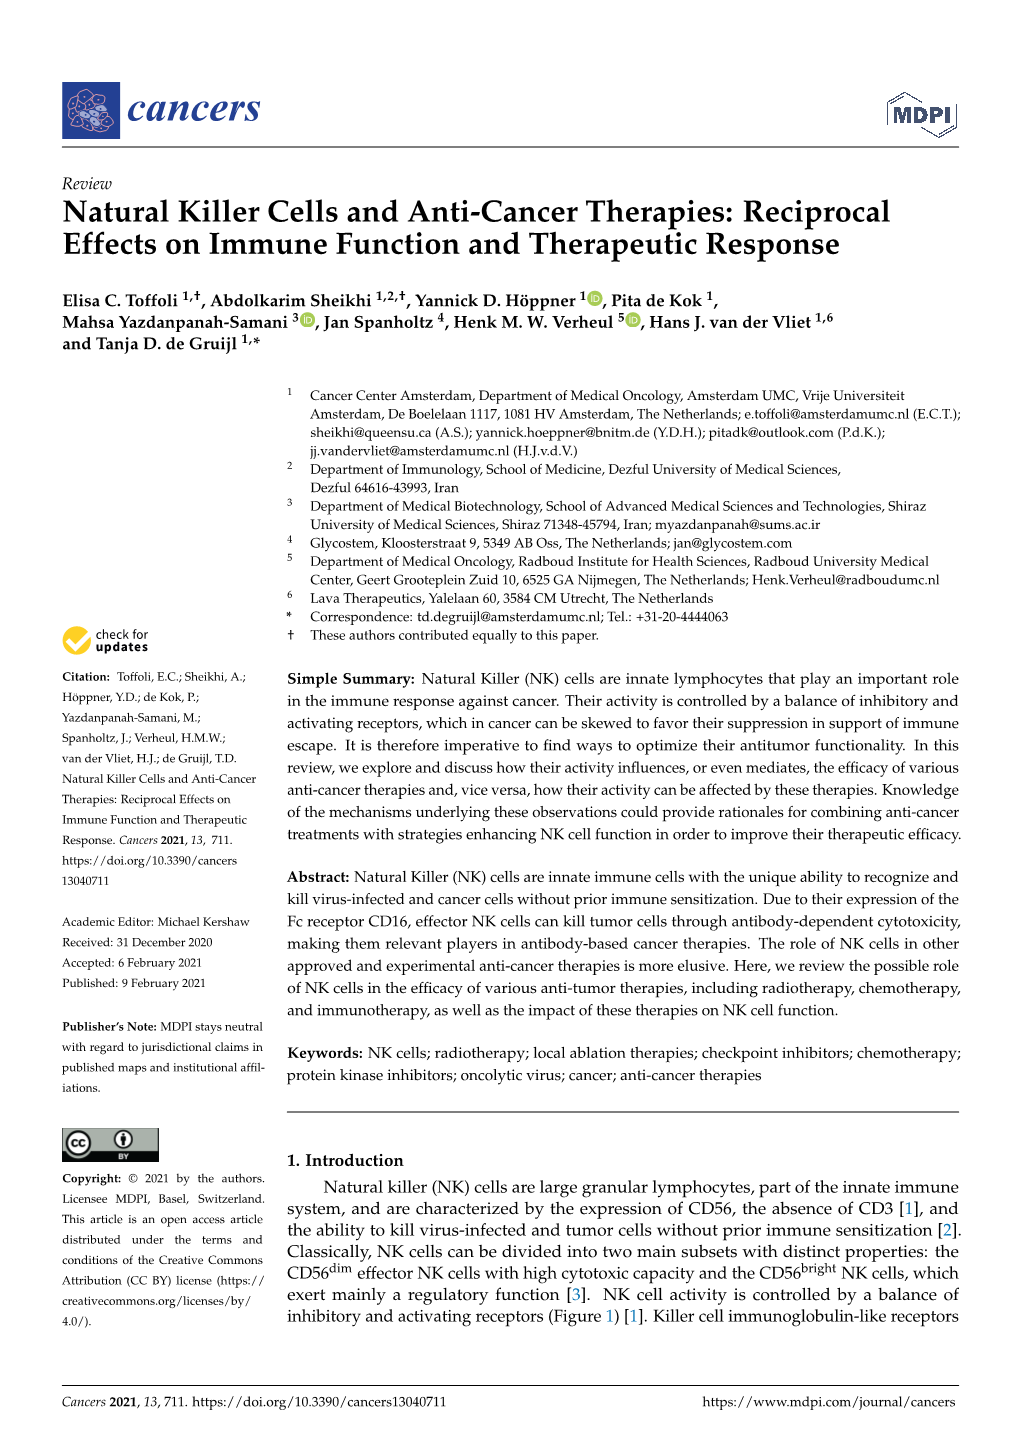 Natural Killer Cells and Anti-Cancer Therapies: Reciprocal Effects on Immune Function and Therapeutic Response